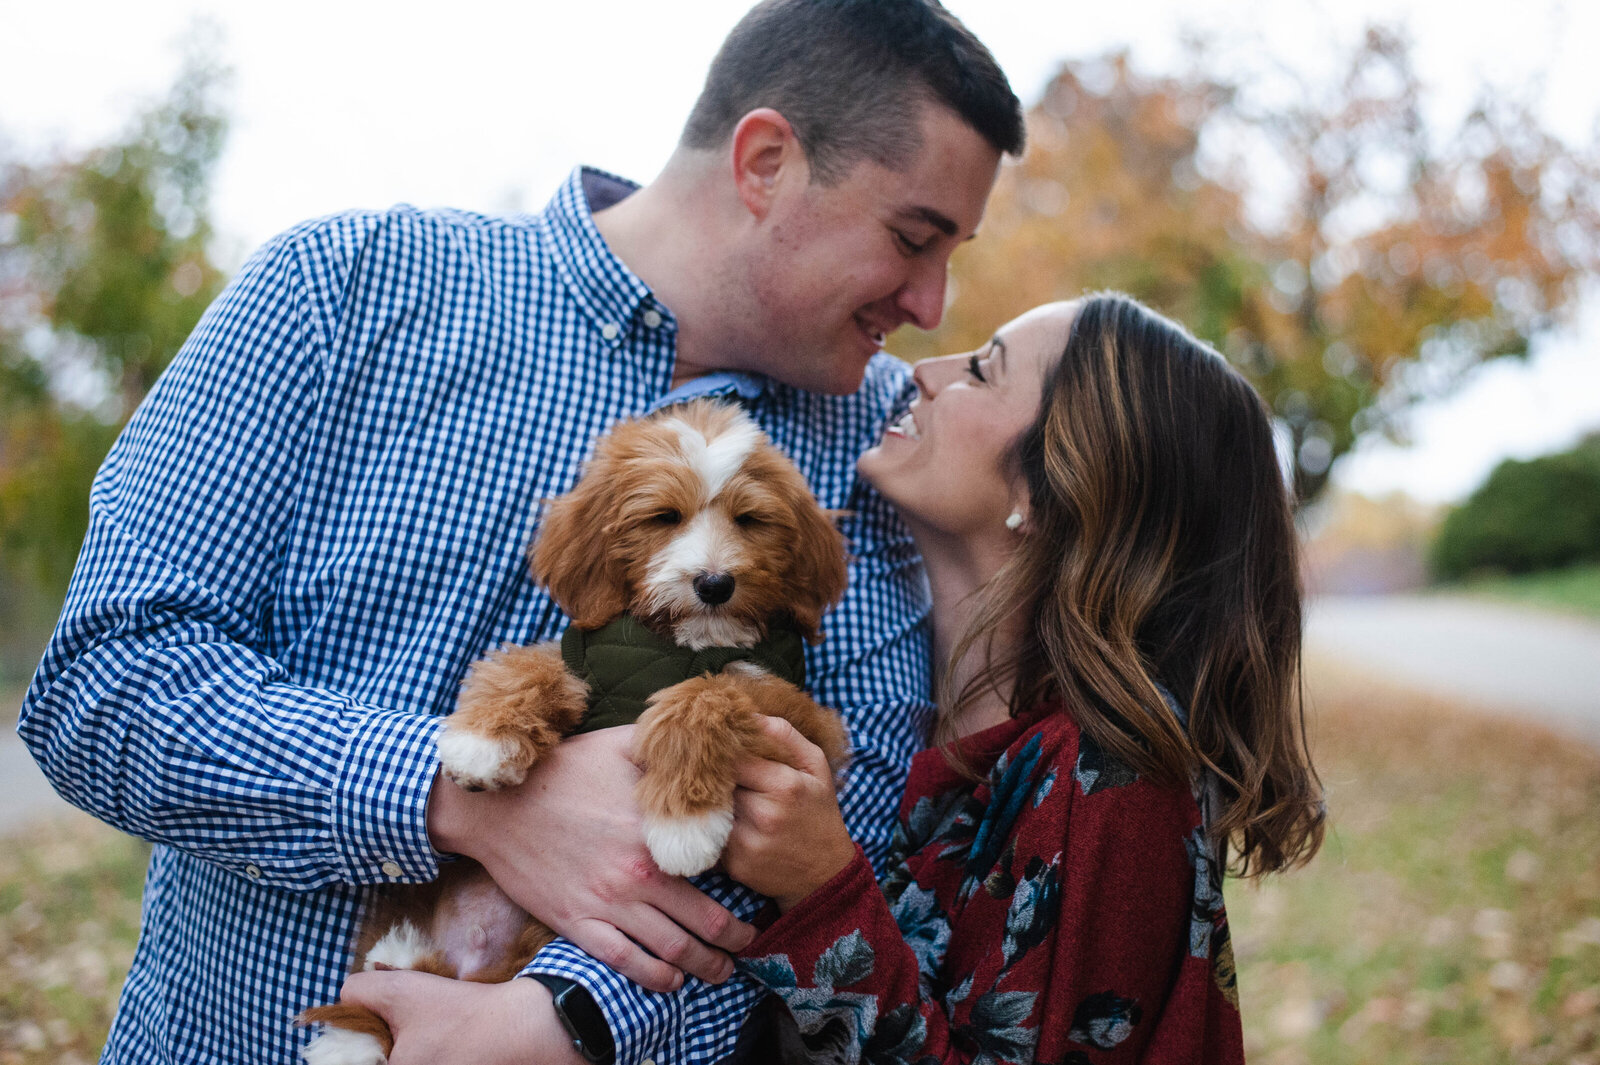 Knoxville family photographer captures couple holding their dog